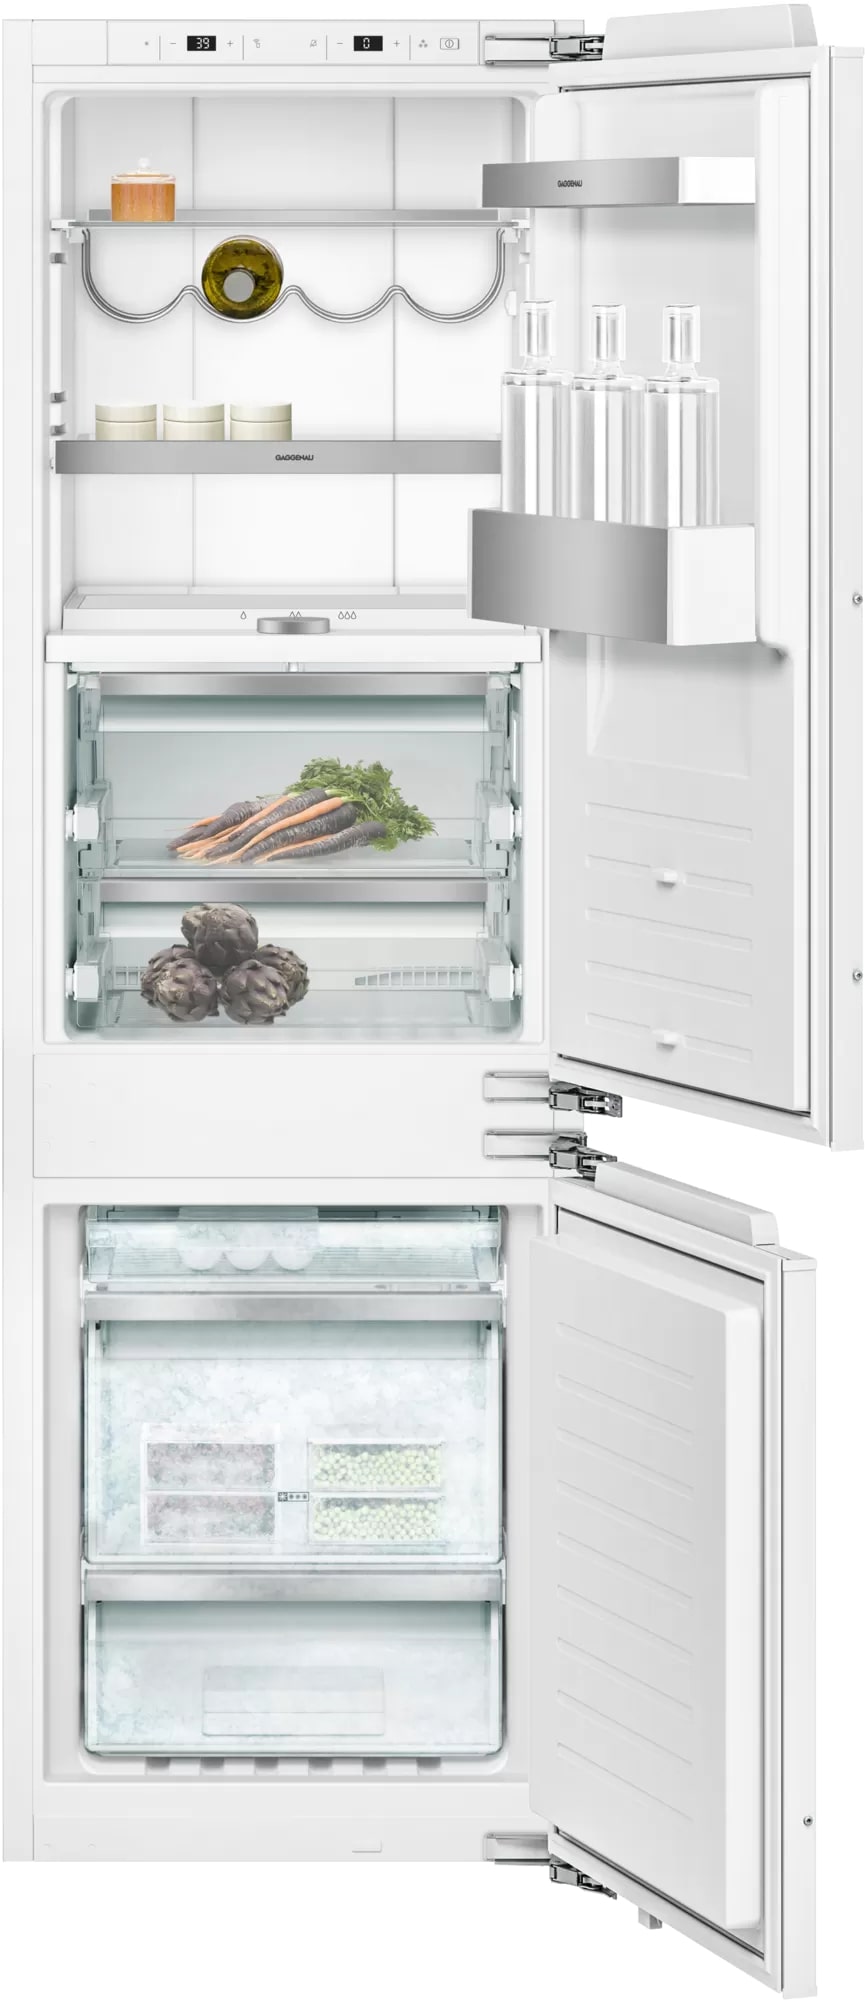 Gaggenau - 22.25 Inch 7.9 cu. ft Built In / Integrated Bottom Mount Refrigerator in Panel Ready - RB282705